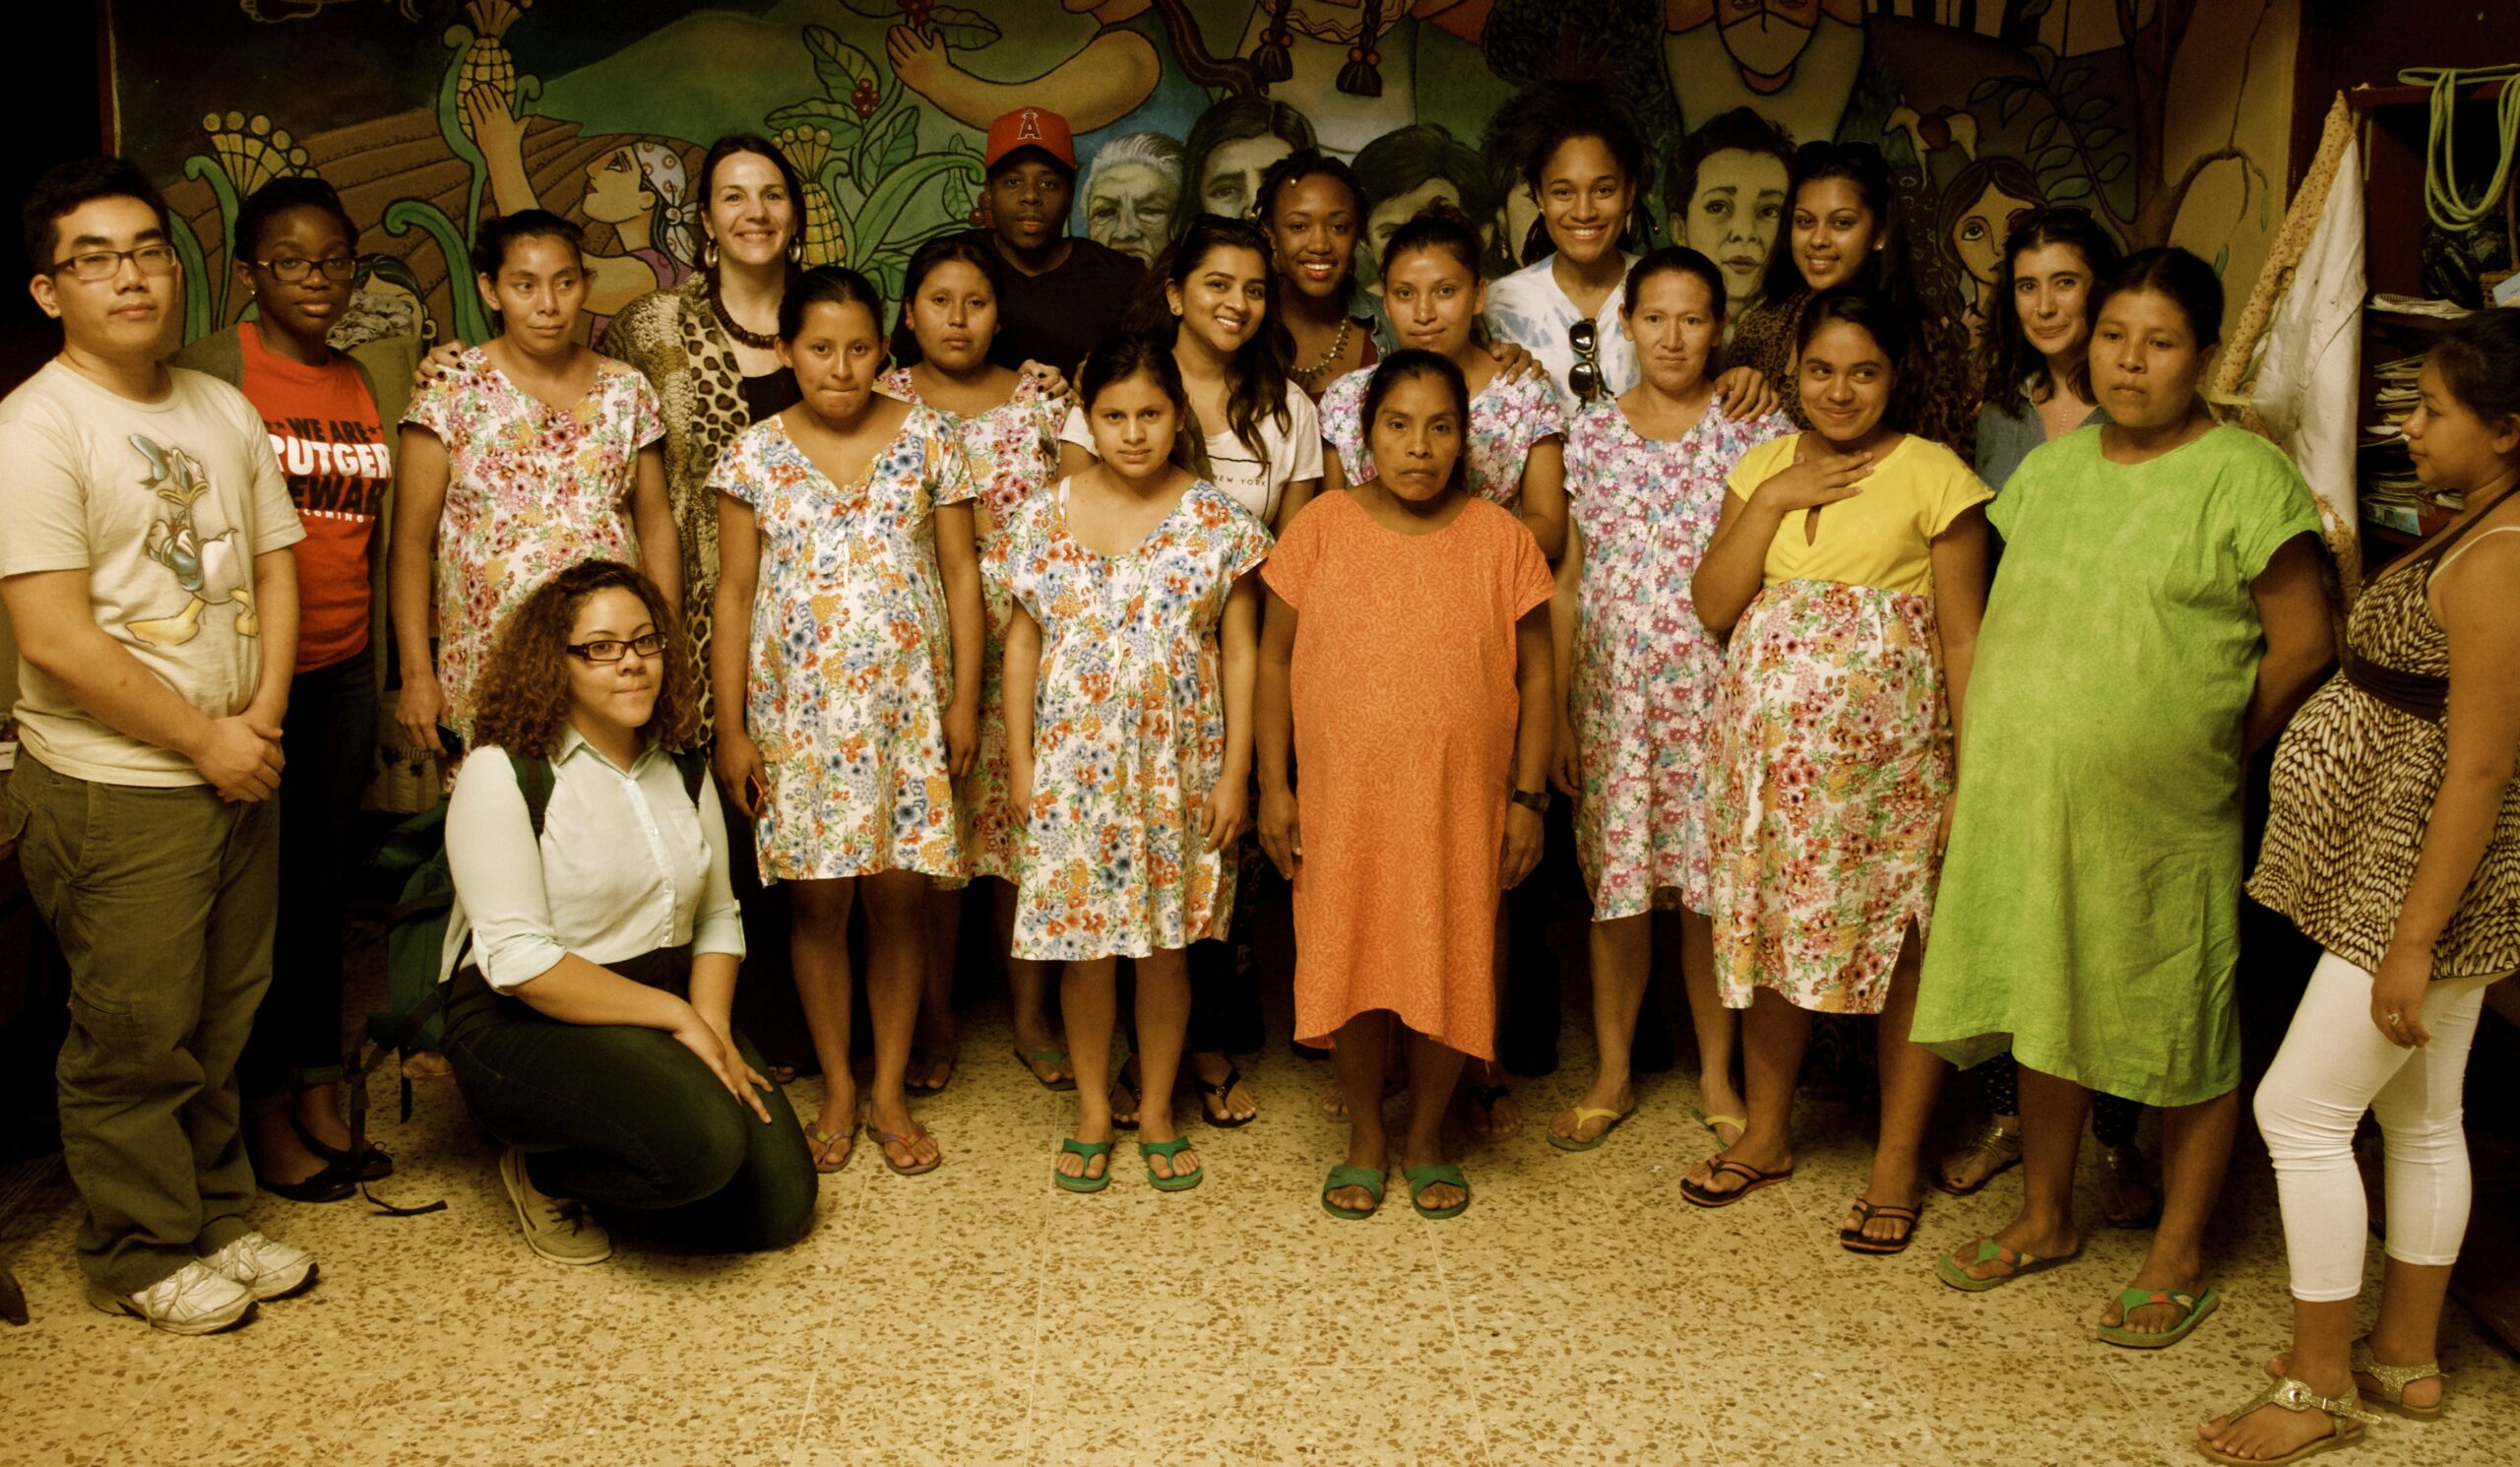 A group of primarily women of various ages and ethnicities standing in a half circle, looking at the camera